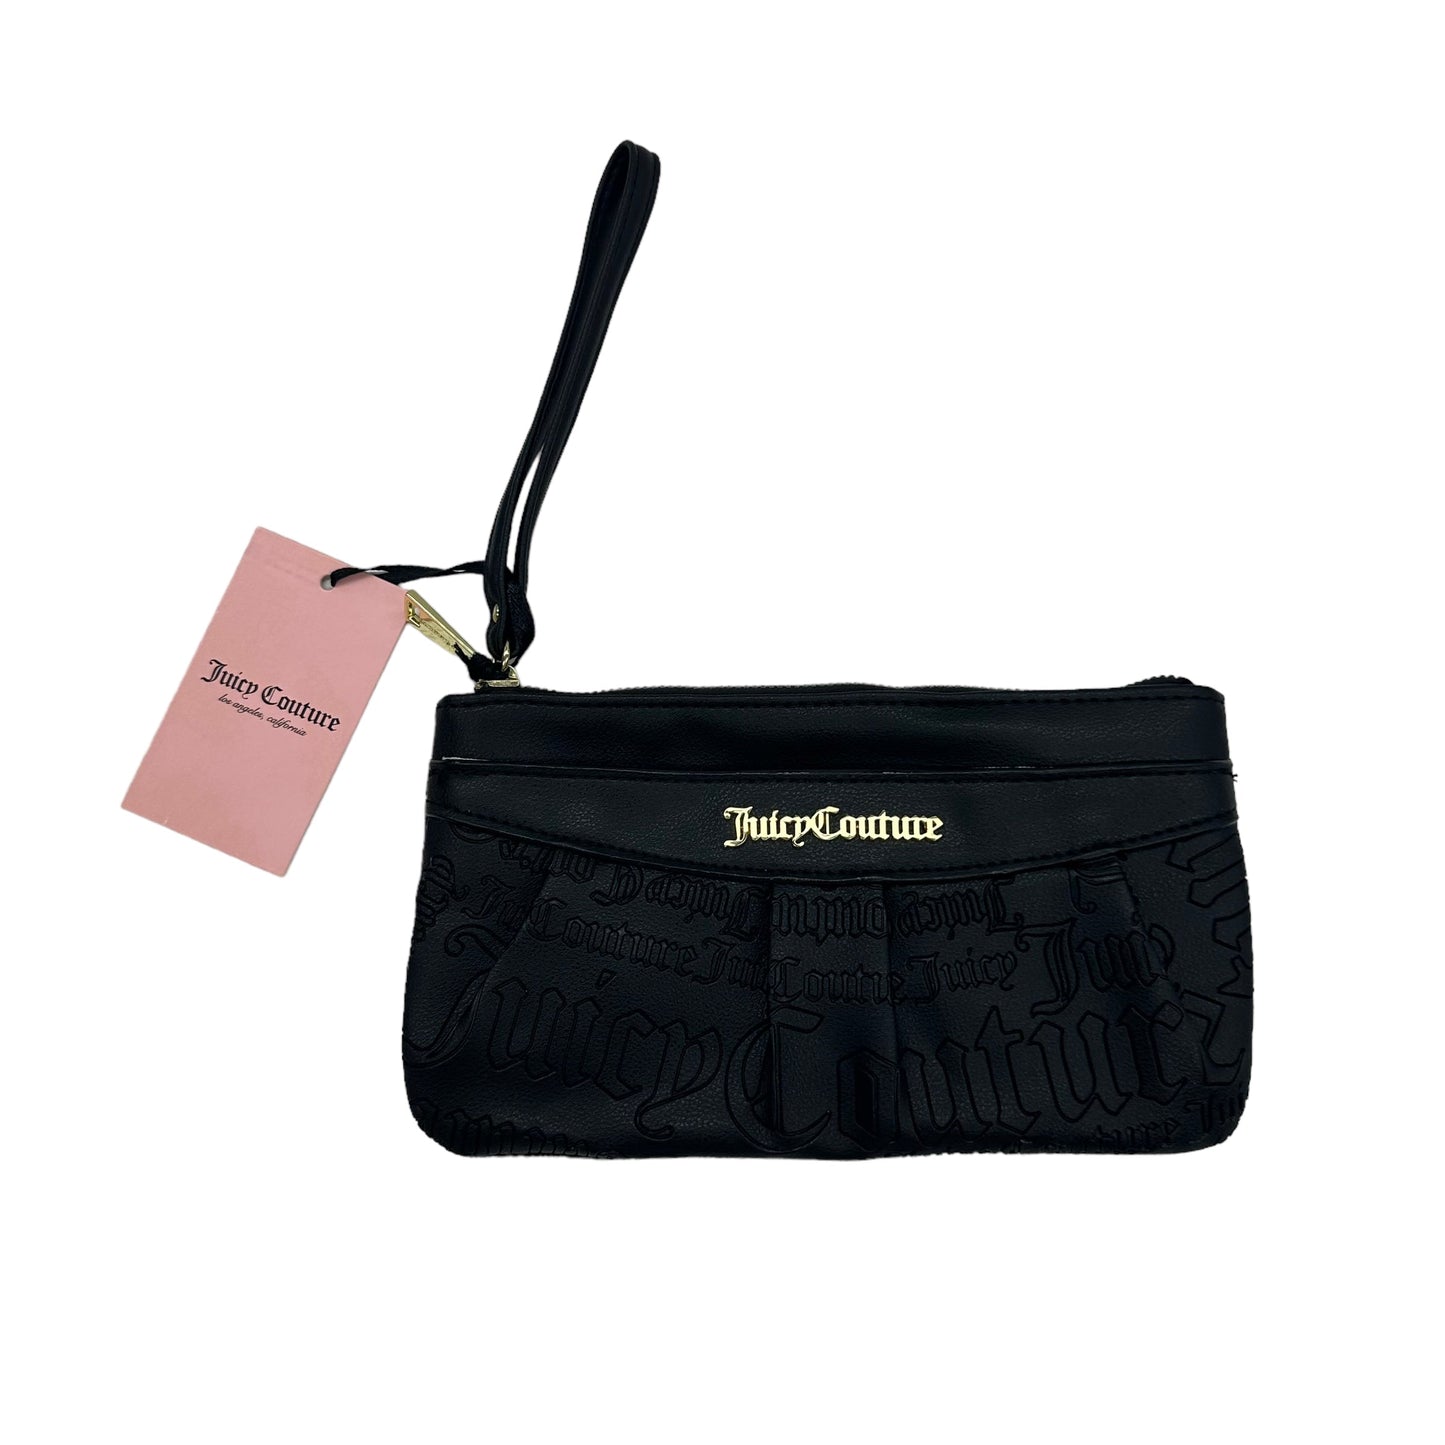 Wristlet By Juicy Couture  Size: Medium